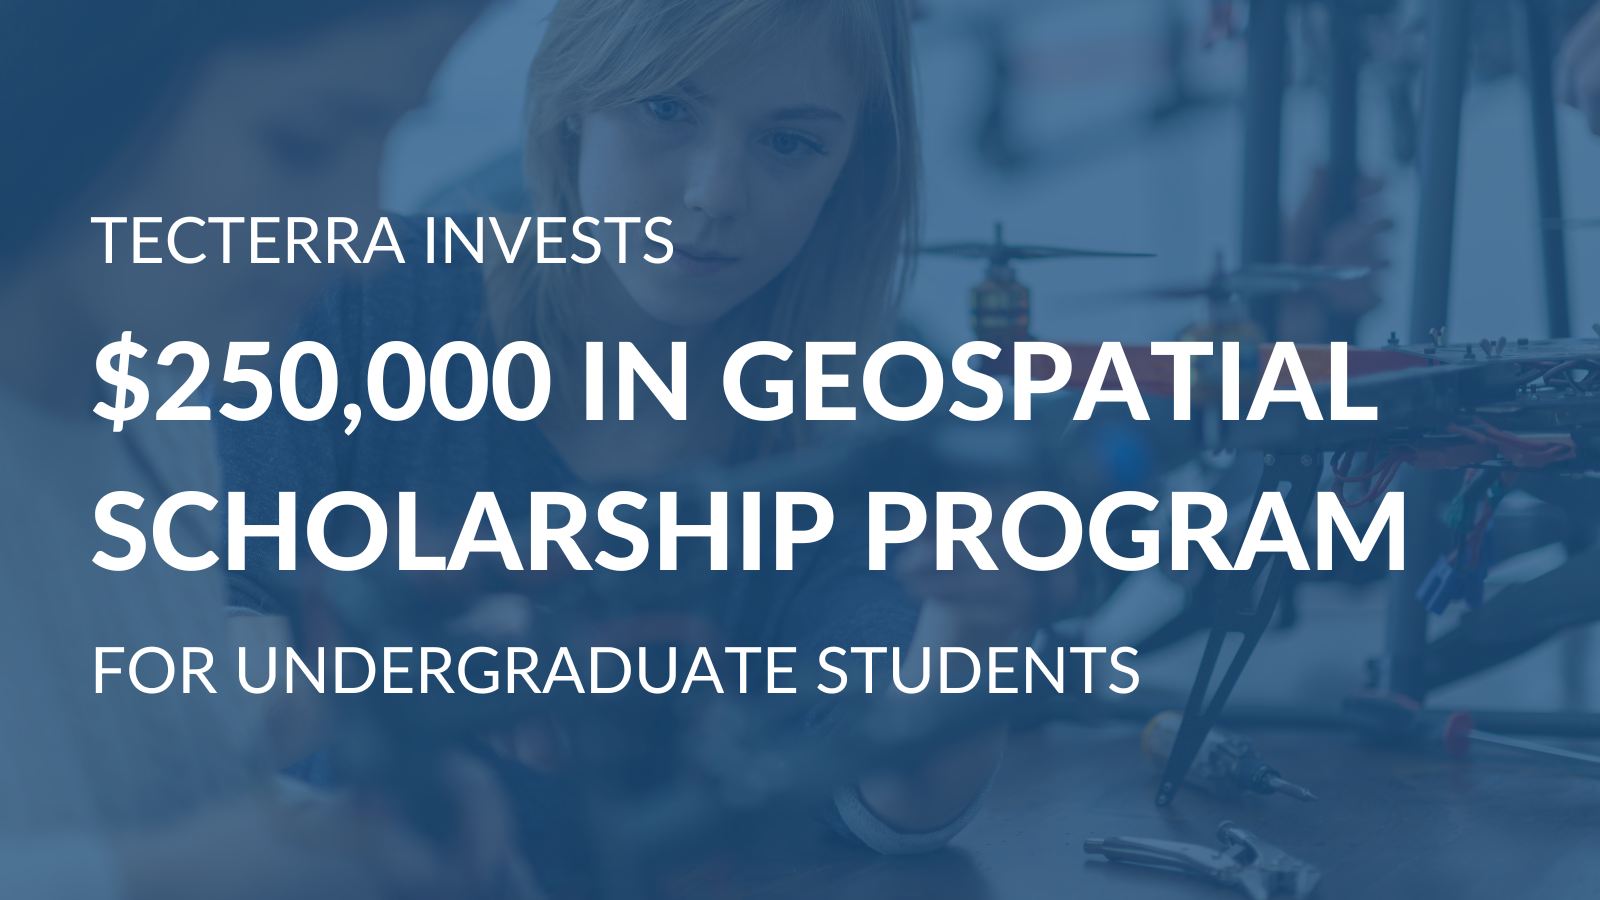 TECTERRA Invests an Additional $600,000 into Geospatial Scholarship Program